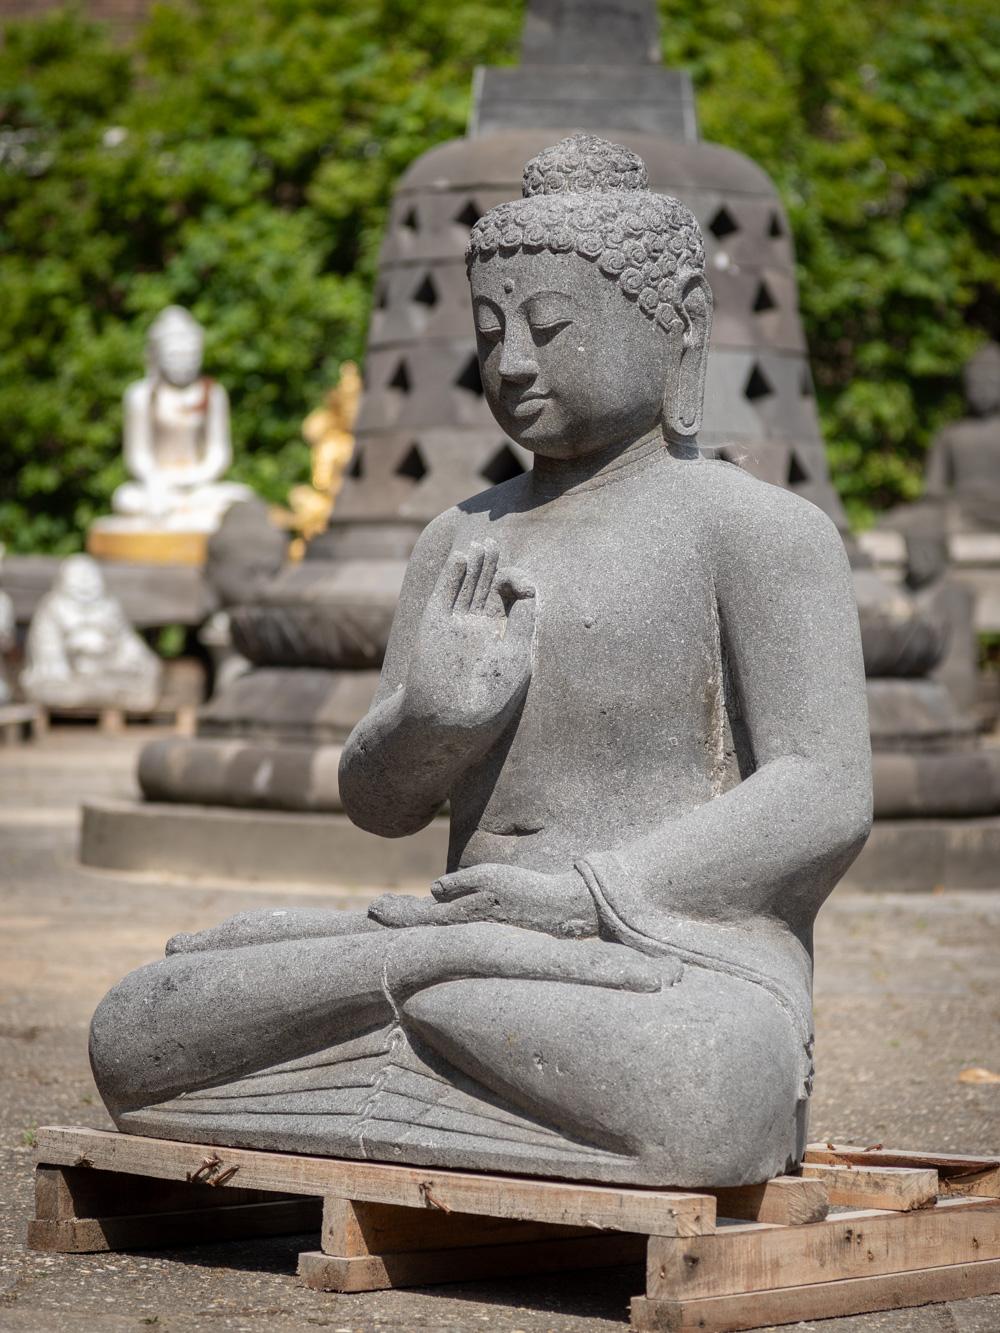 The large lavastone Buddha statue from Indonesia is a remarkable testament to artistic skill and spiritual representation. Hand-carved from a single block of lavastone, this statue stands at an impressive height of 107 cm, with dimensions of 87 cm